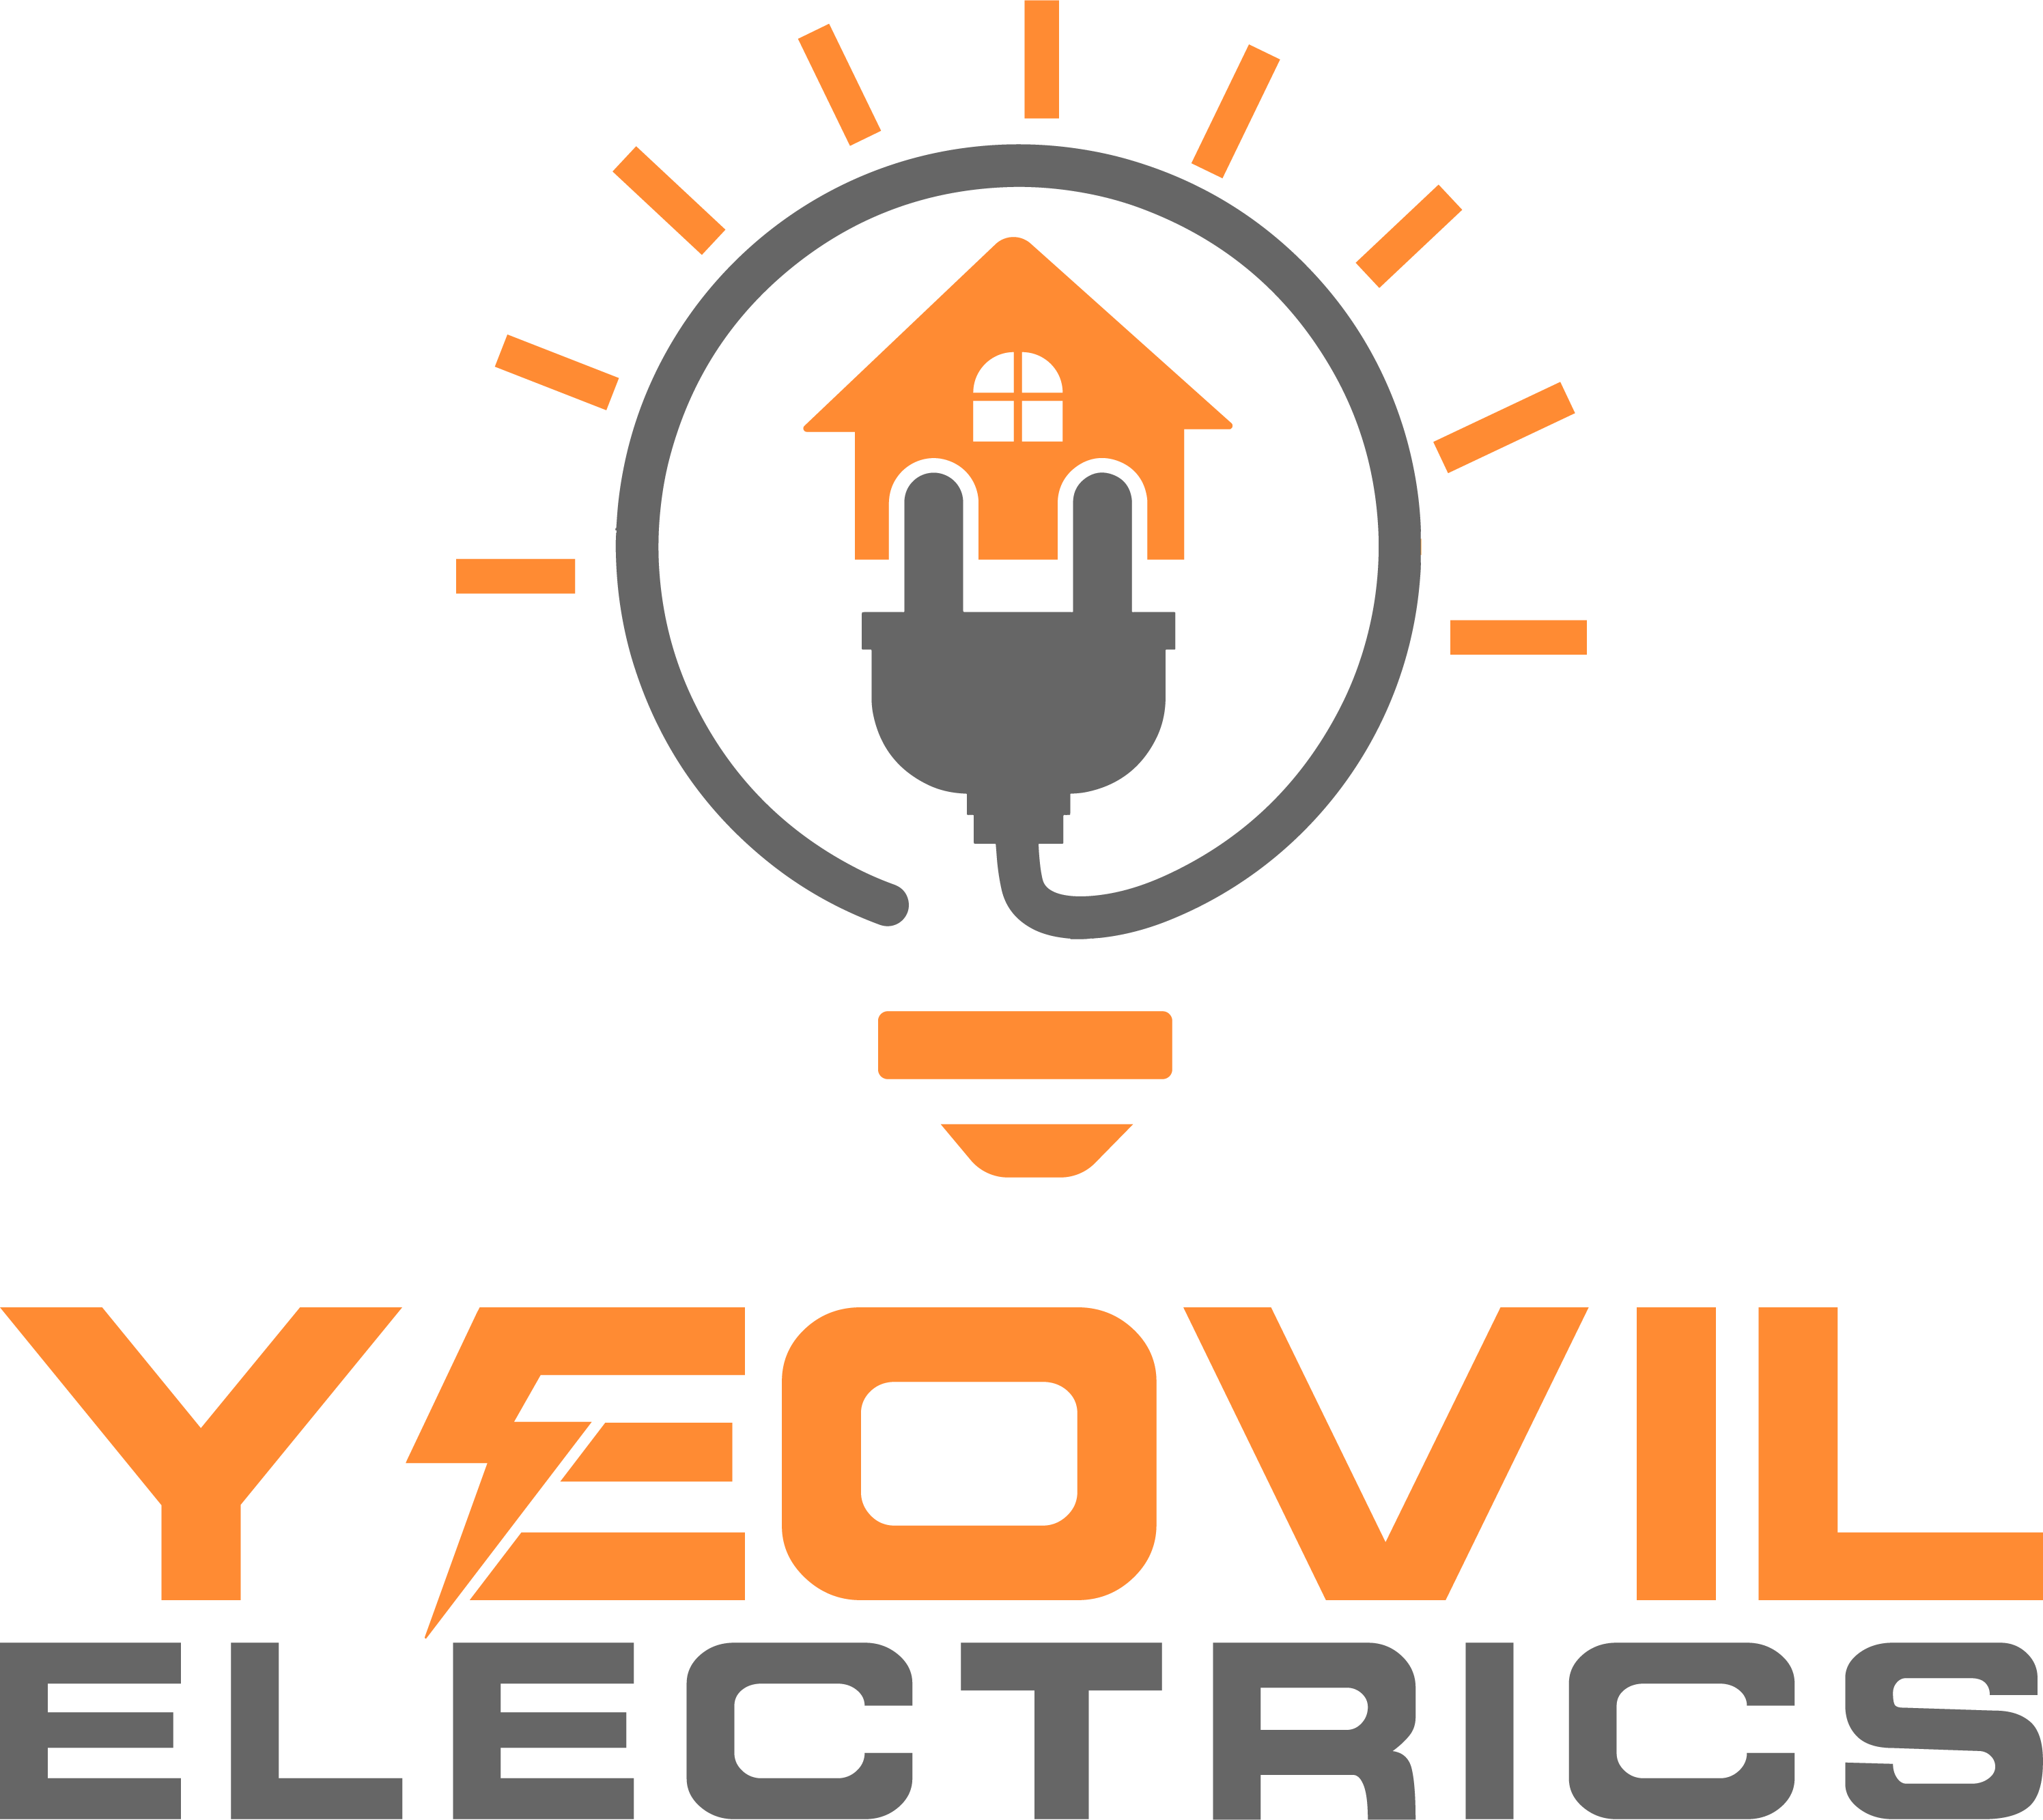 Based in Yeovil, and with many years of experience, Yeovil Electrics specialise in domestic installations